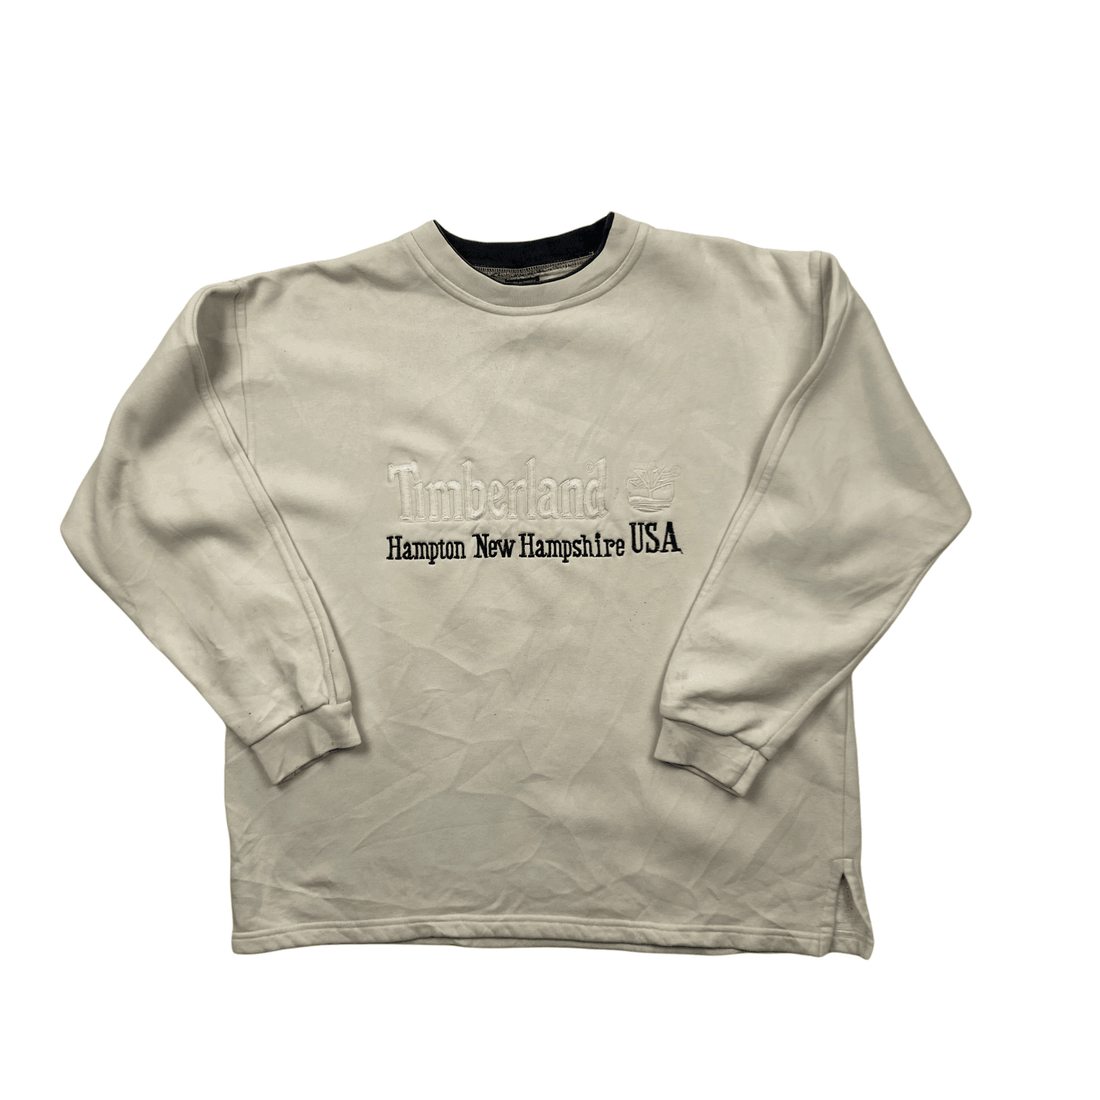 Vintage 90s Cream Timberland Spell-Out Sweatshirt - Small - The Streetwear Studio